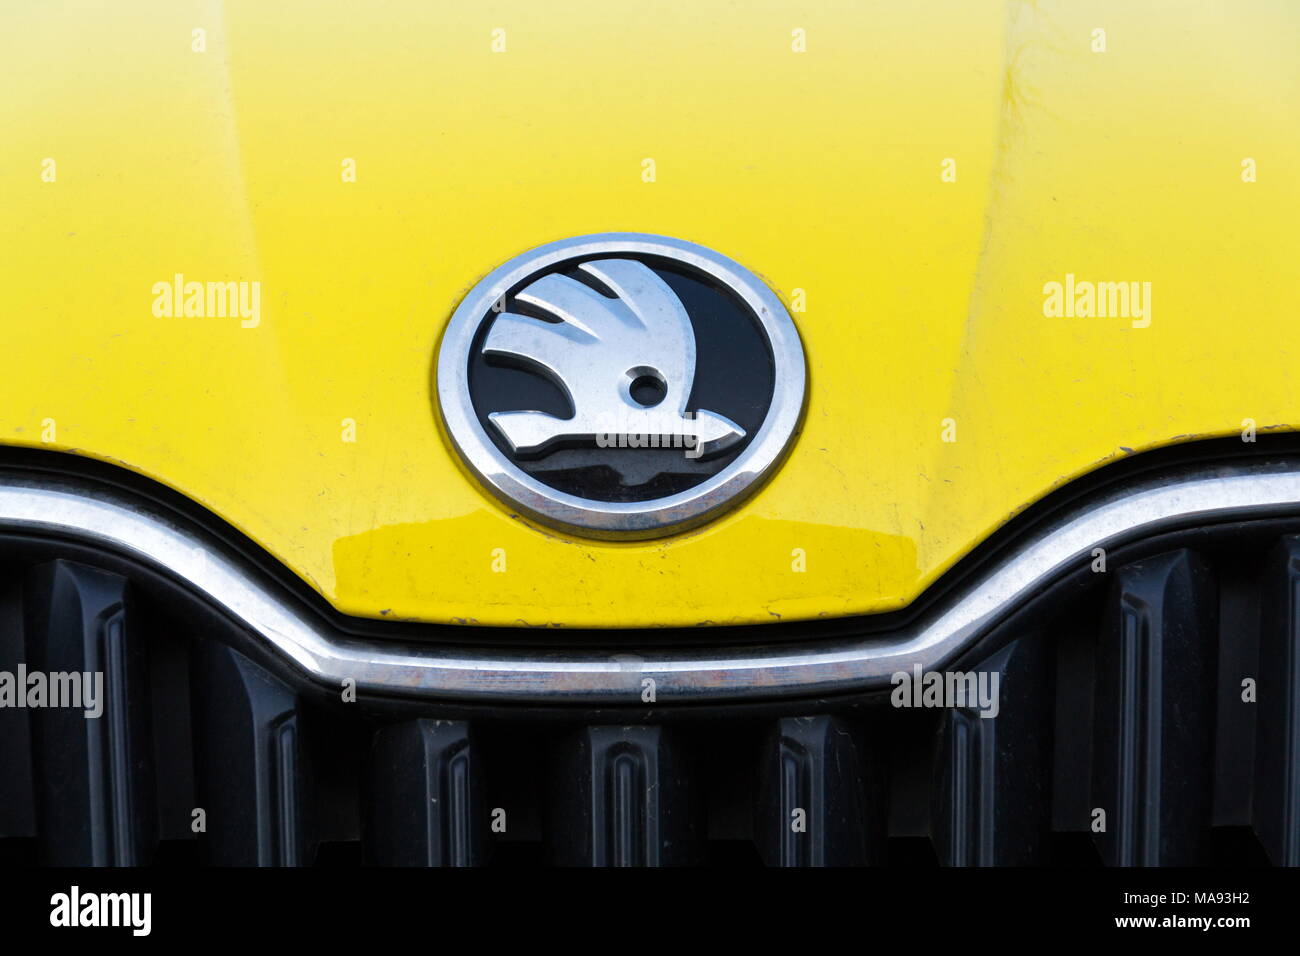 PRAGUE, CZECH REPUBLIC - MARCH 25 2018: Skoda Auto automobile manufacturer from Volkswagen Group company logo on yellow dirty car on March 25, 2018 in Stock Photo